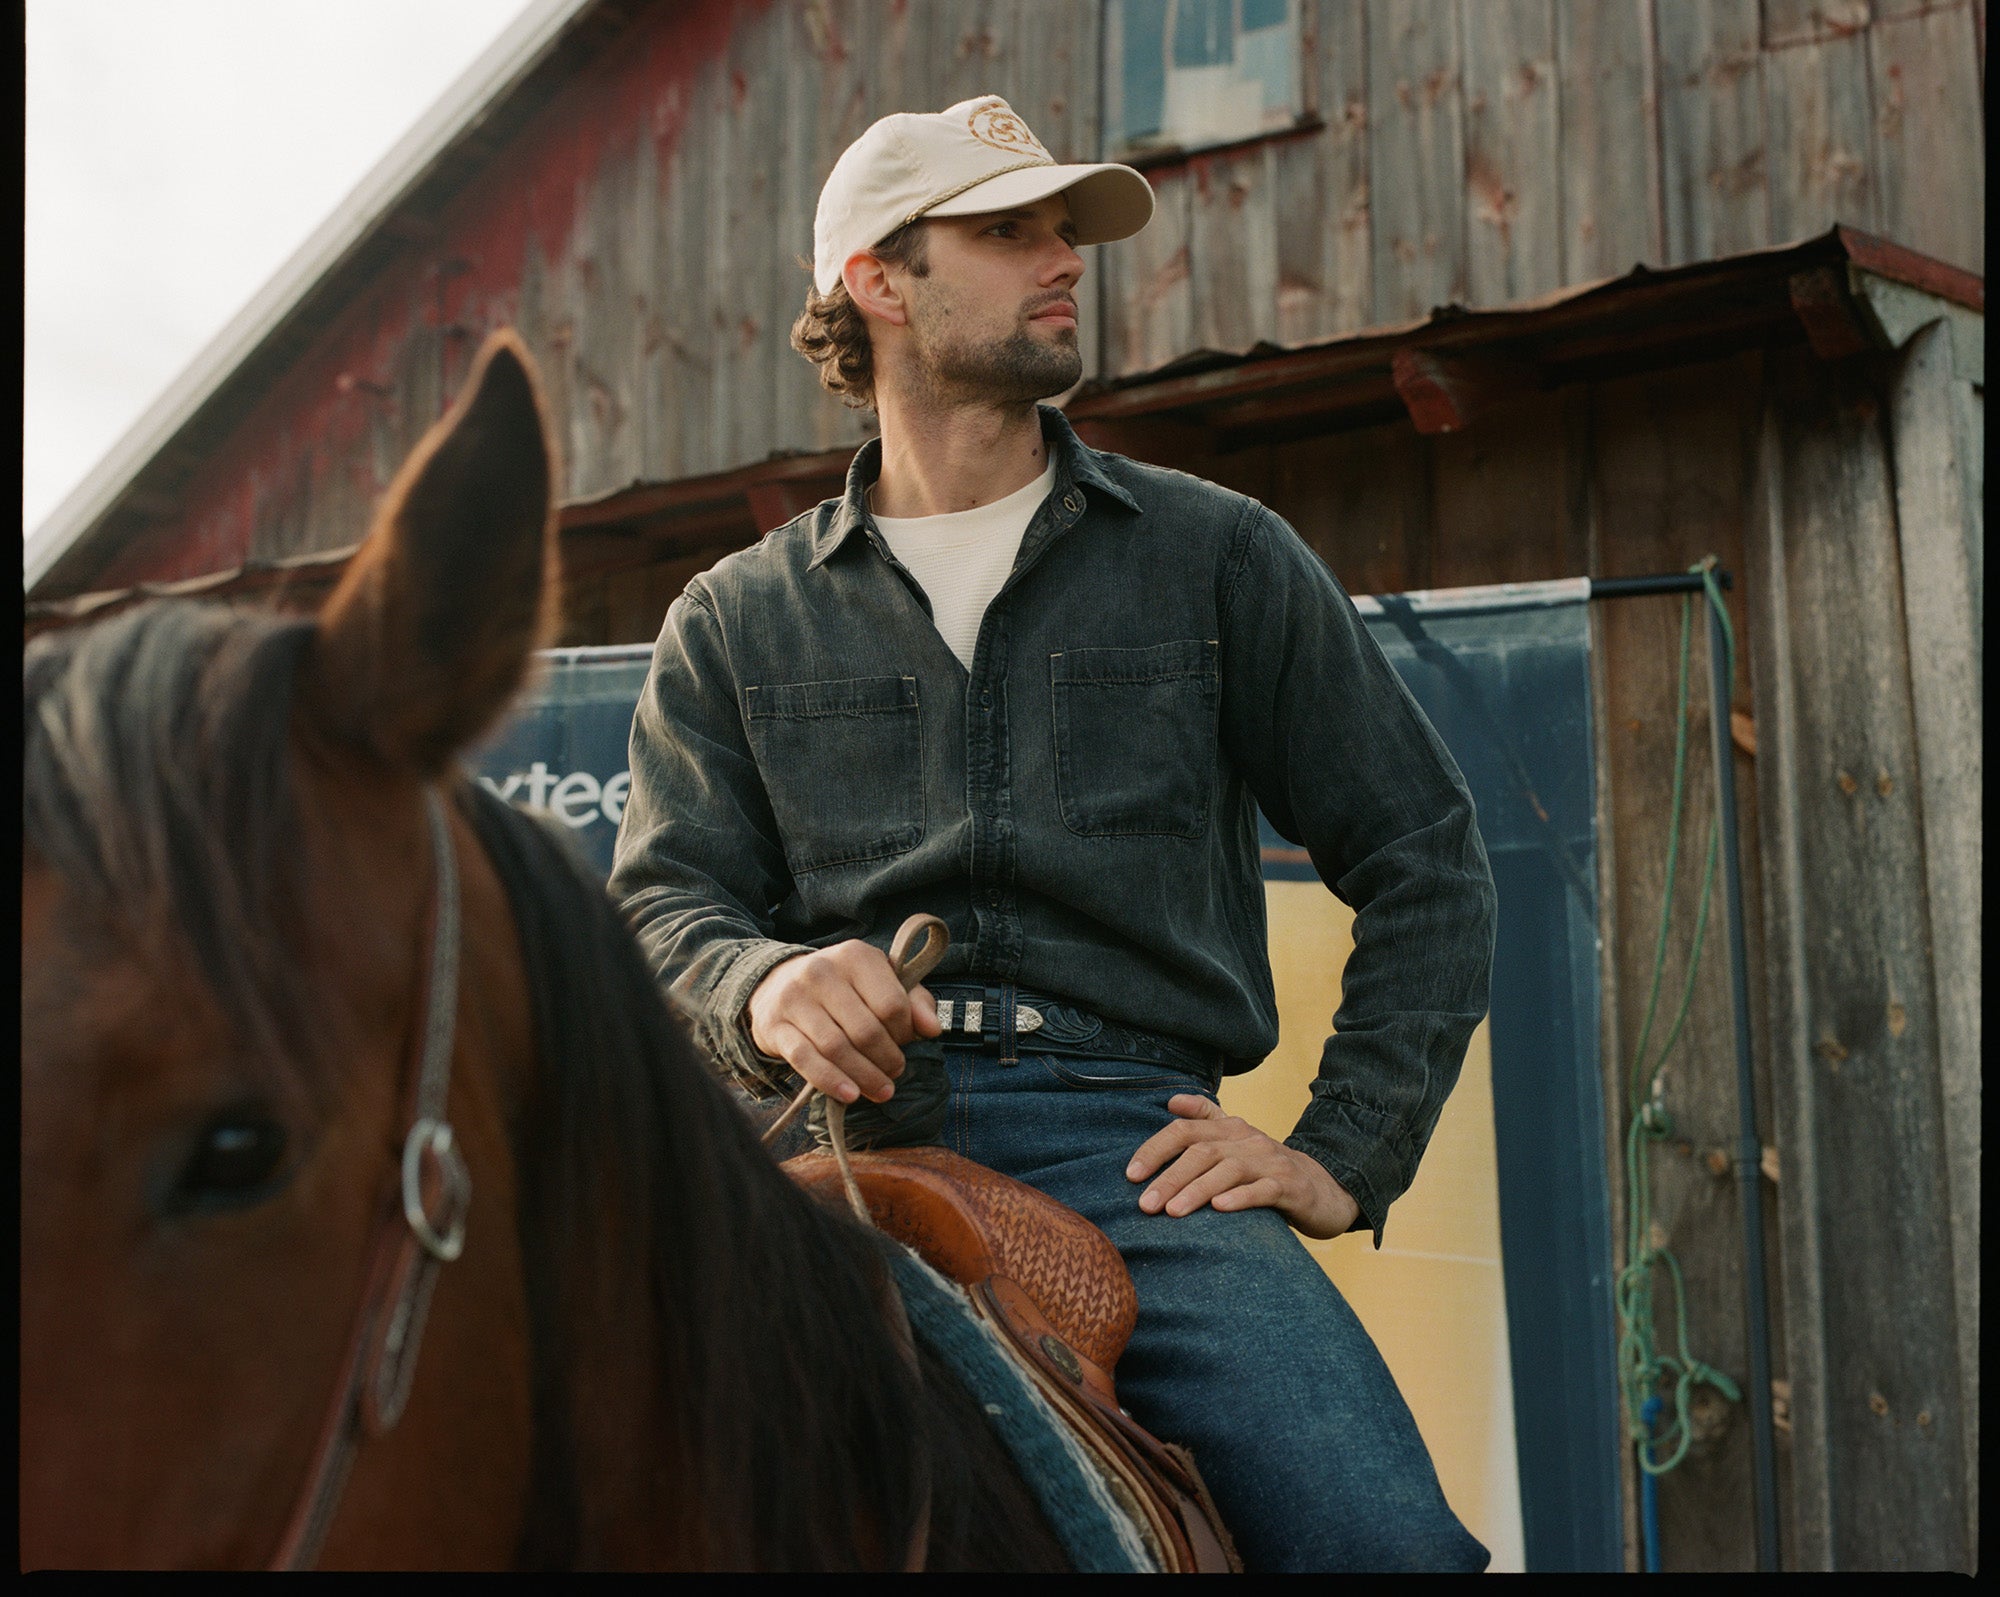 A man in blue jeans sits on a horse gazing off into the sunset.